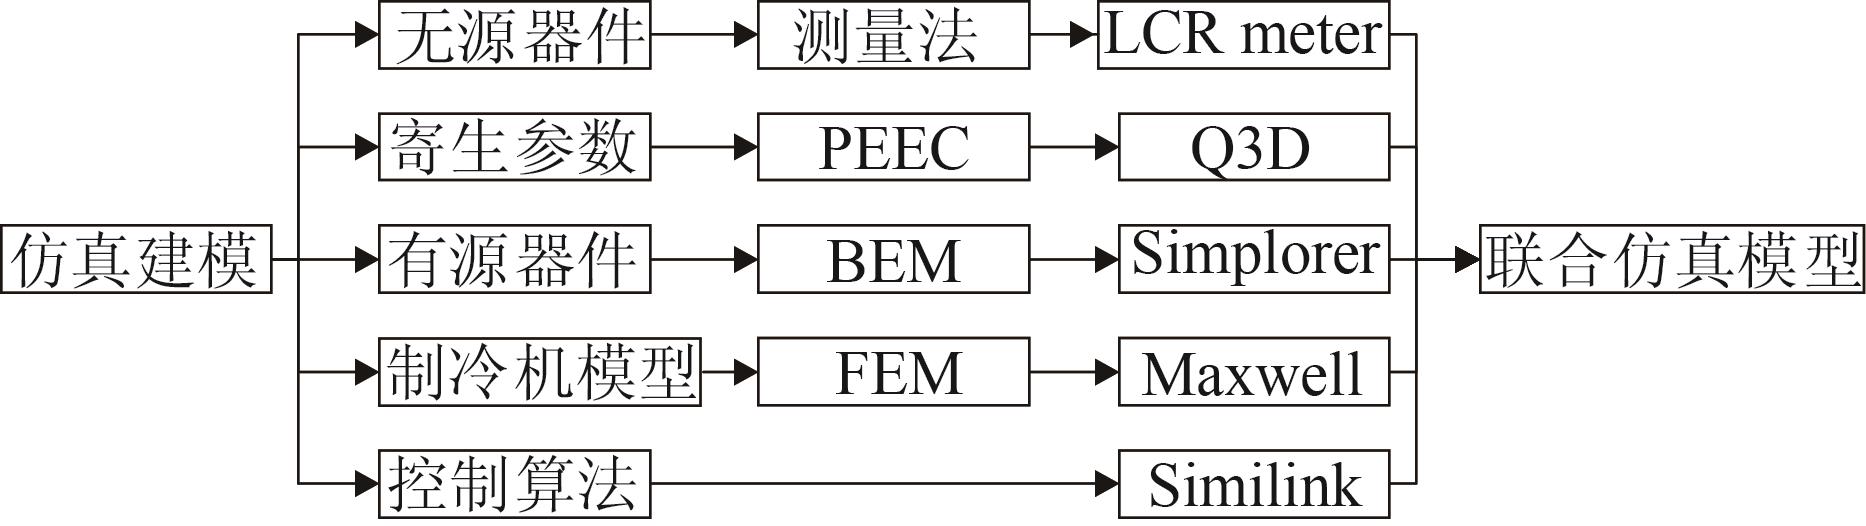 Schematic of the co-simulation modeling